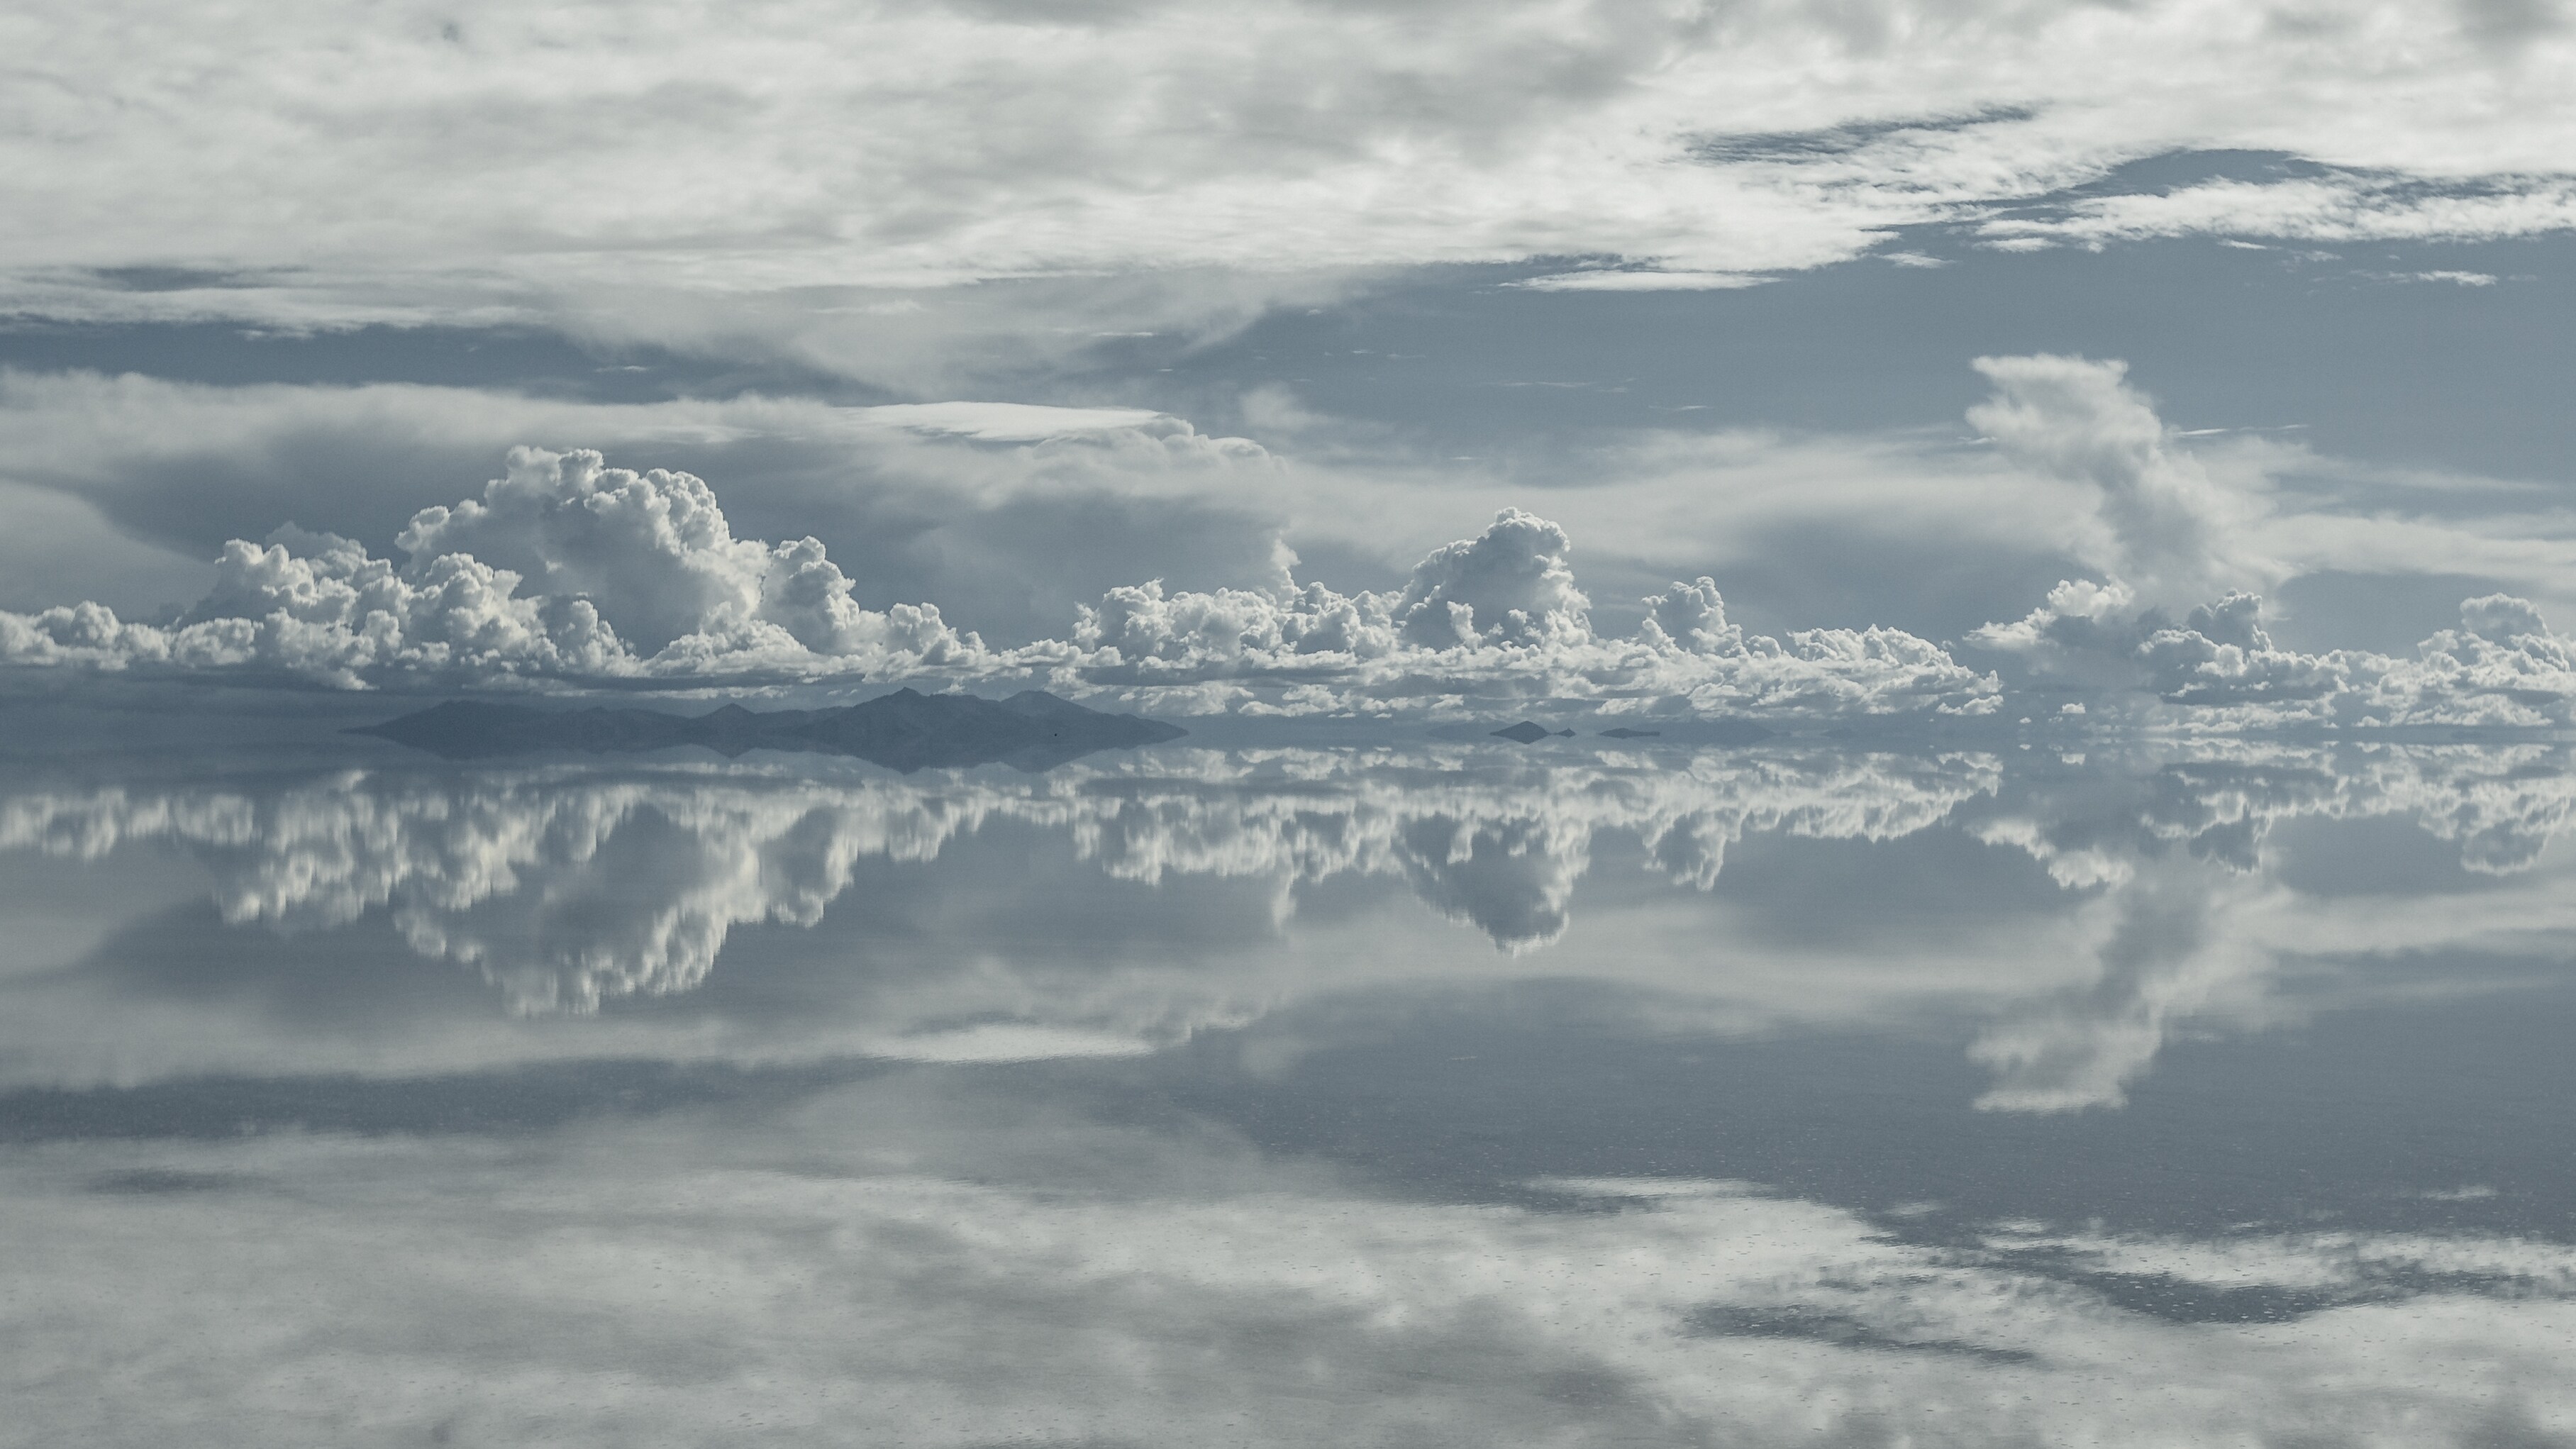 Clouds reflected in the flood waters of Salar de Uyuni, after seasonal rains transform the salt flats into the largest mirror on the planet.  (National Geographic/Freddie Claire)